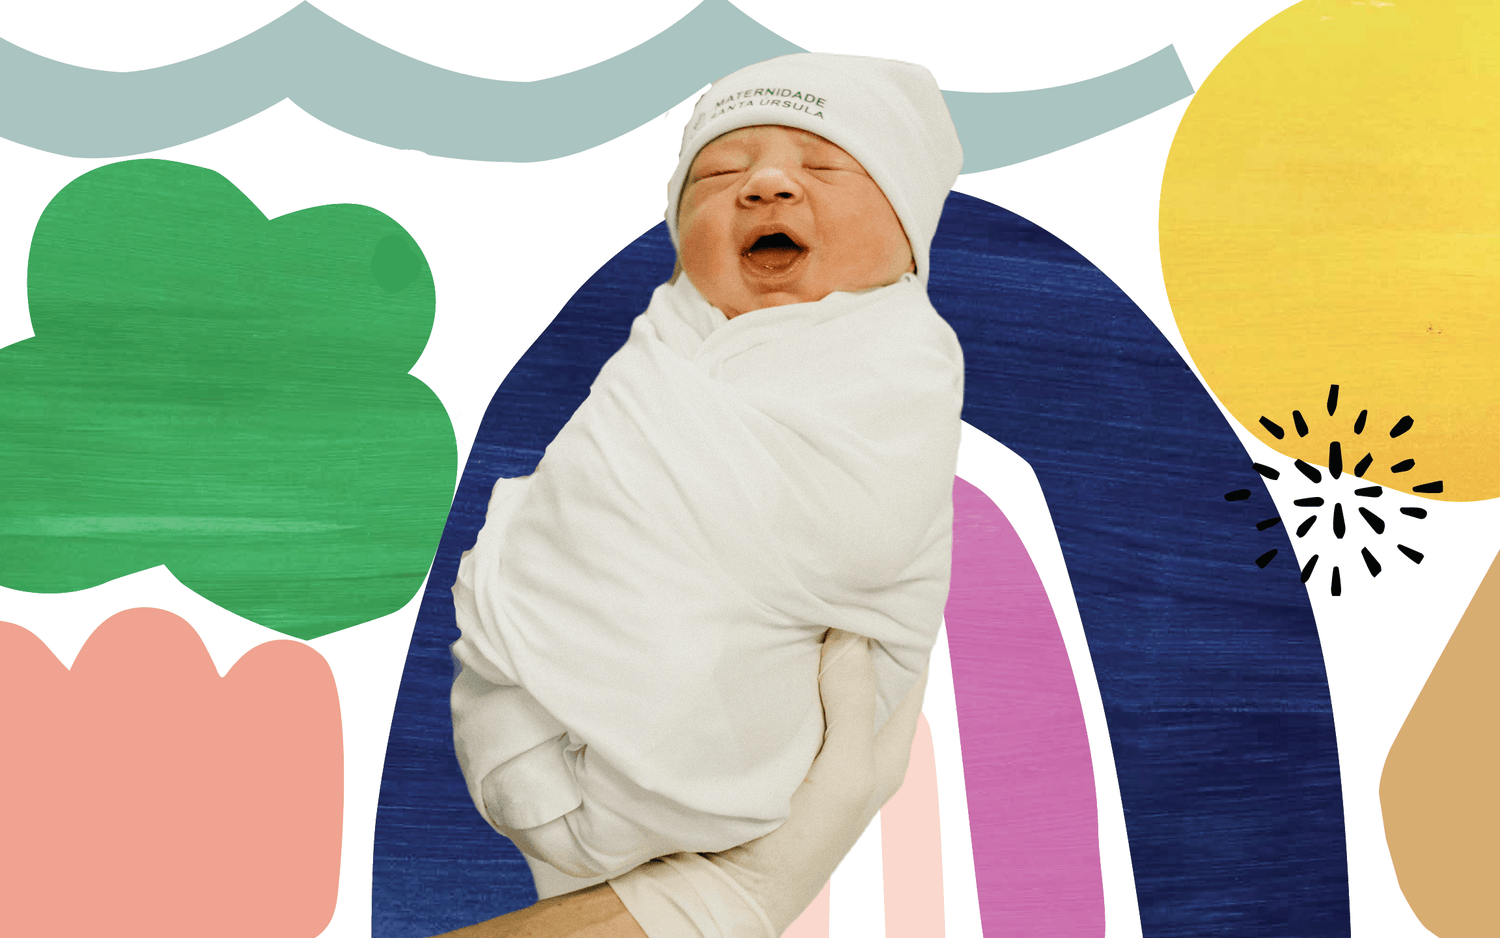 How to Swaddle a Newborn Baby: Guide & Safety Tips